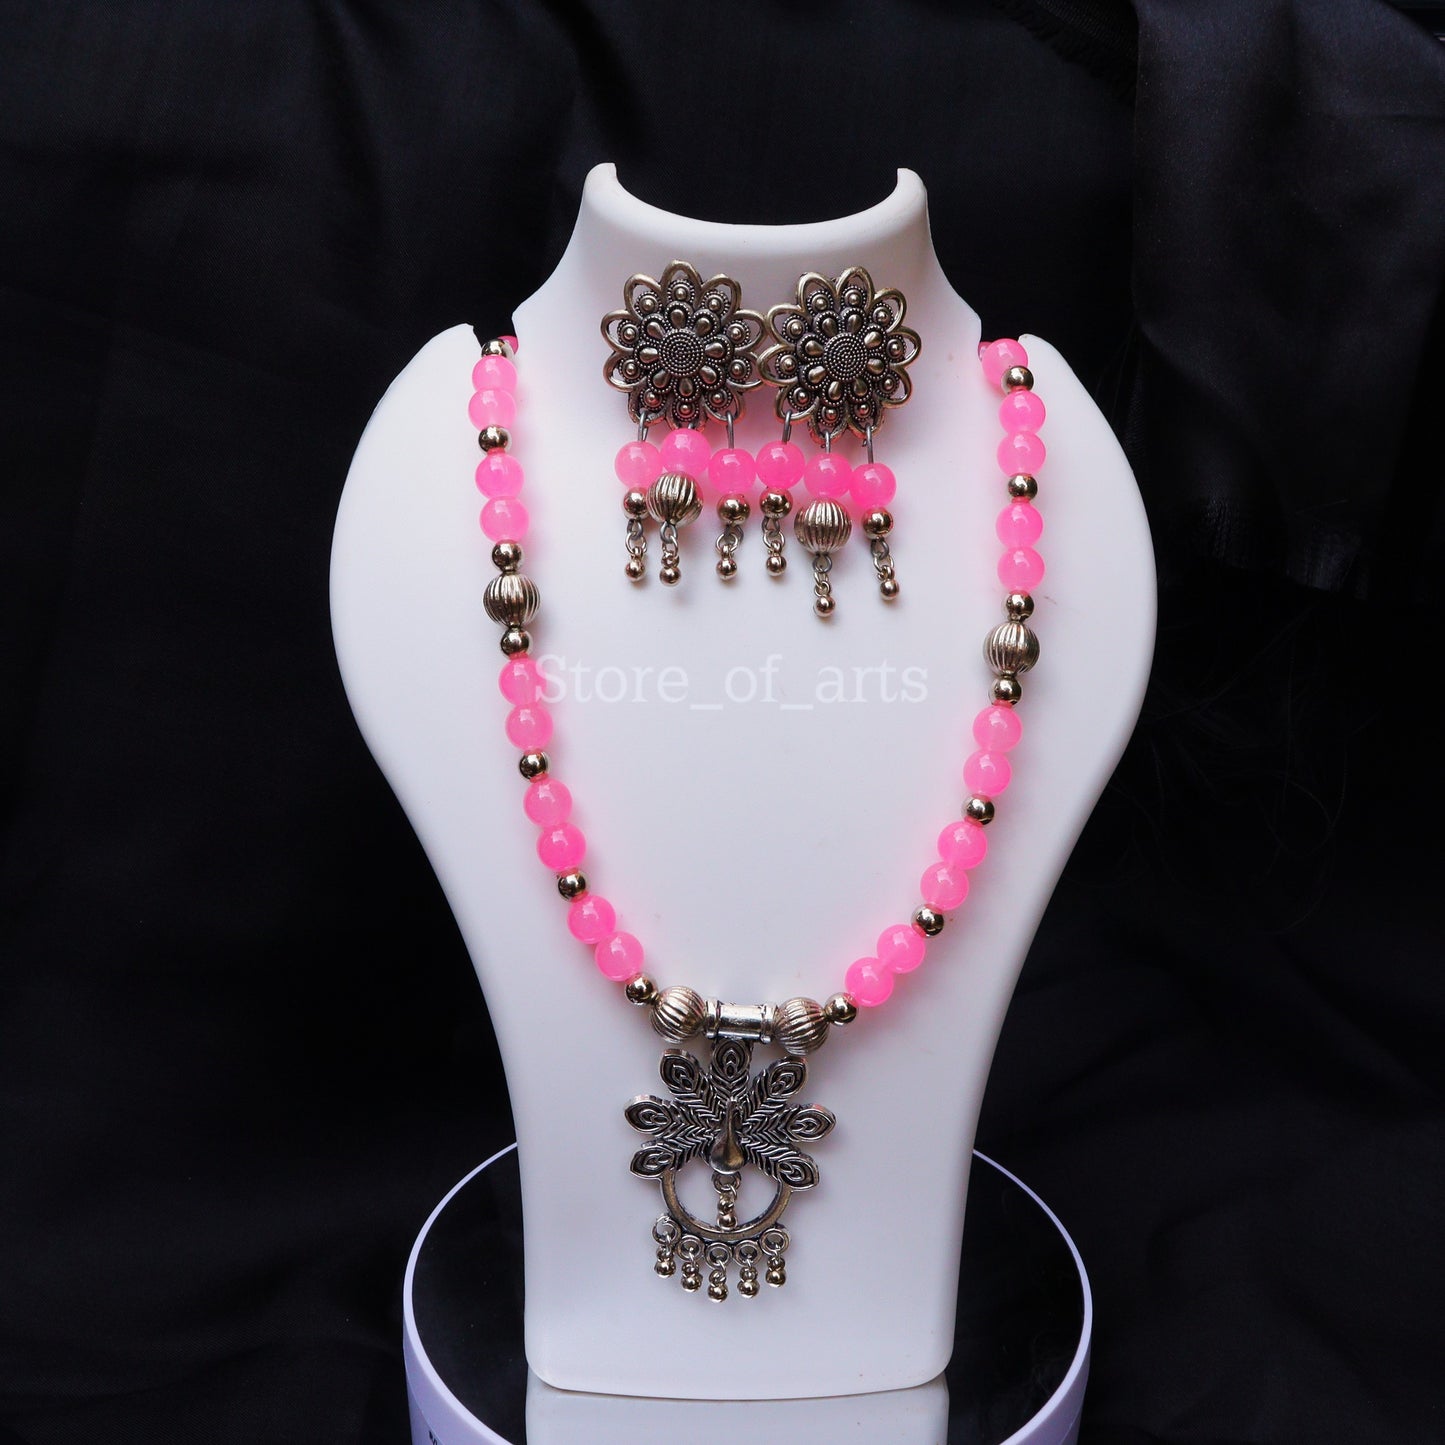 Beautiful Peacock Necklace set with earrings for women